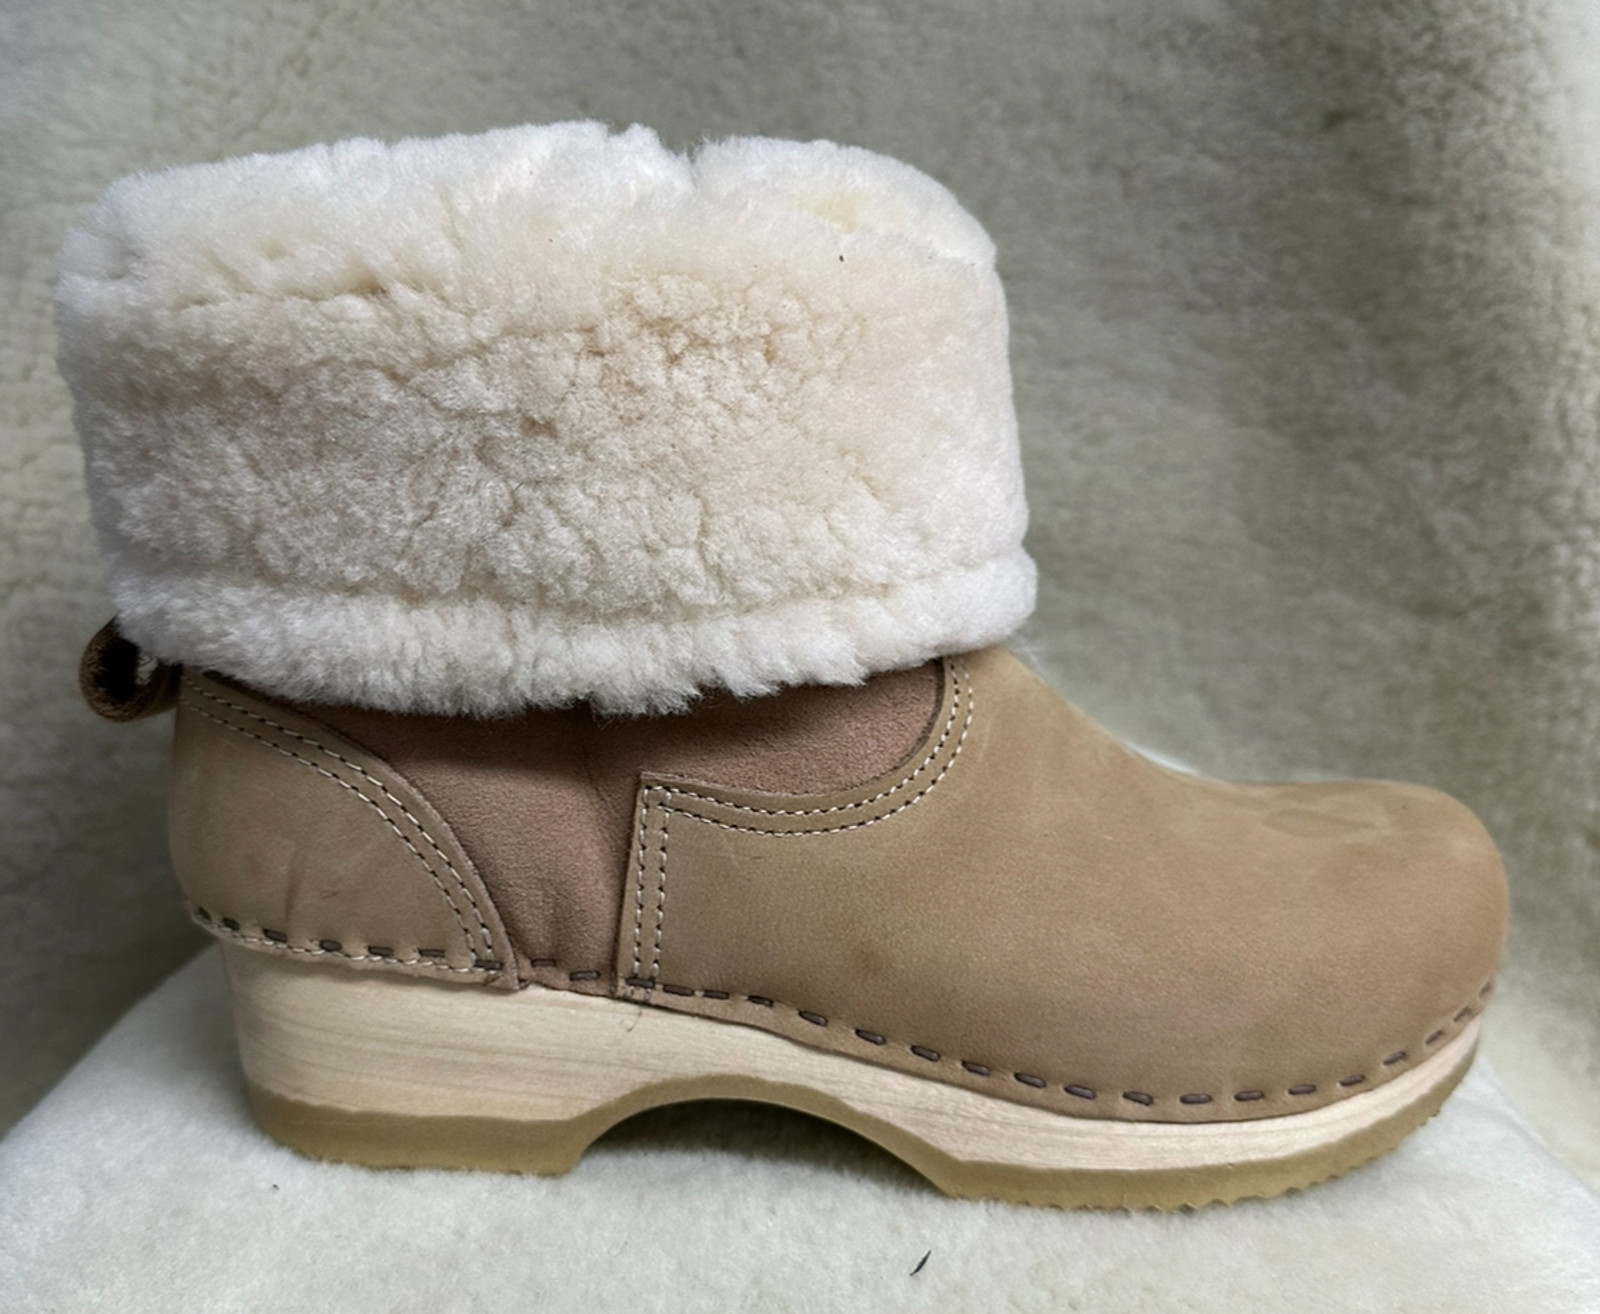 7" Cream Shearling Clog Boots - Low Heels - Size 39